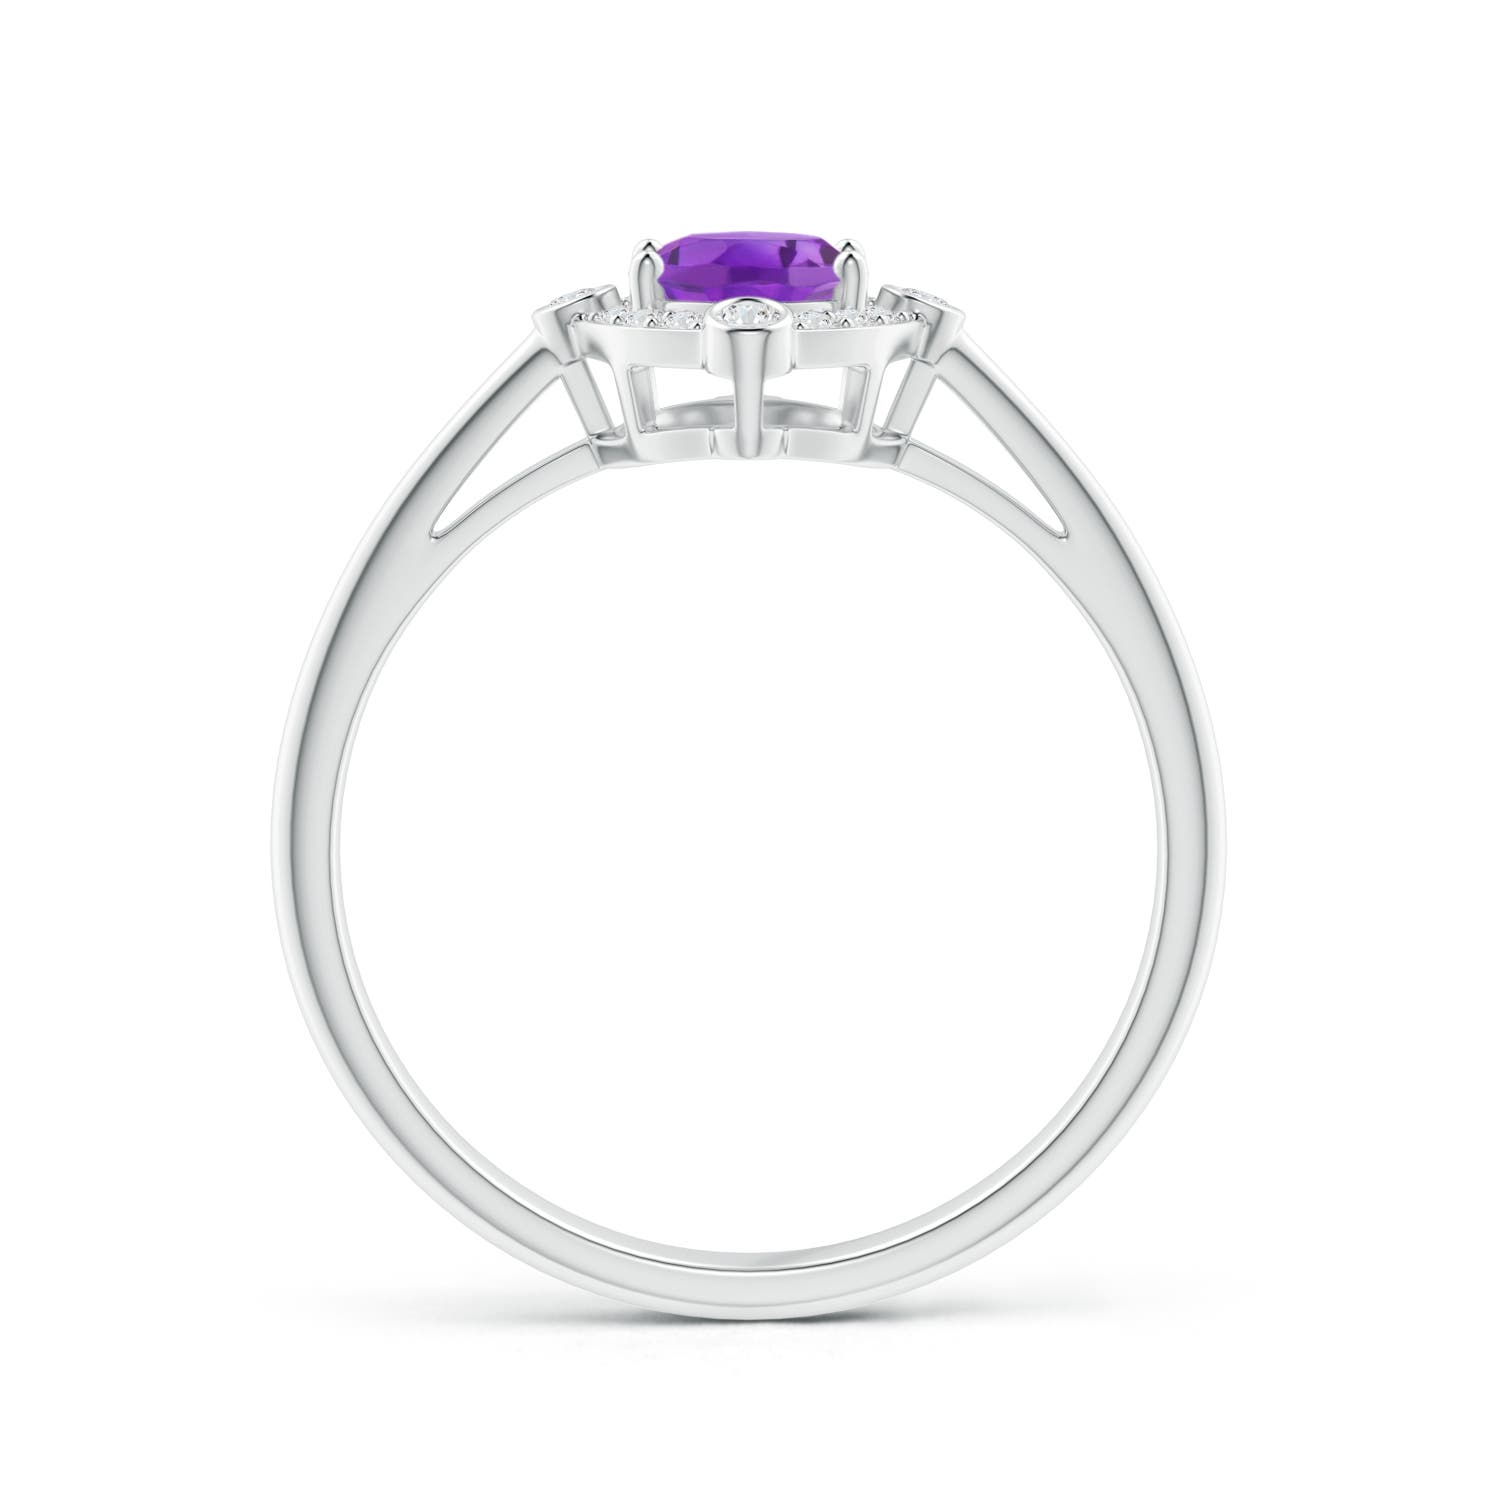 AA - Amethyst / 0.82 CT / 14 KT White Gold